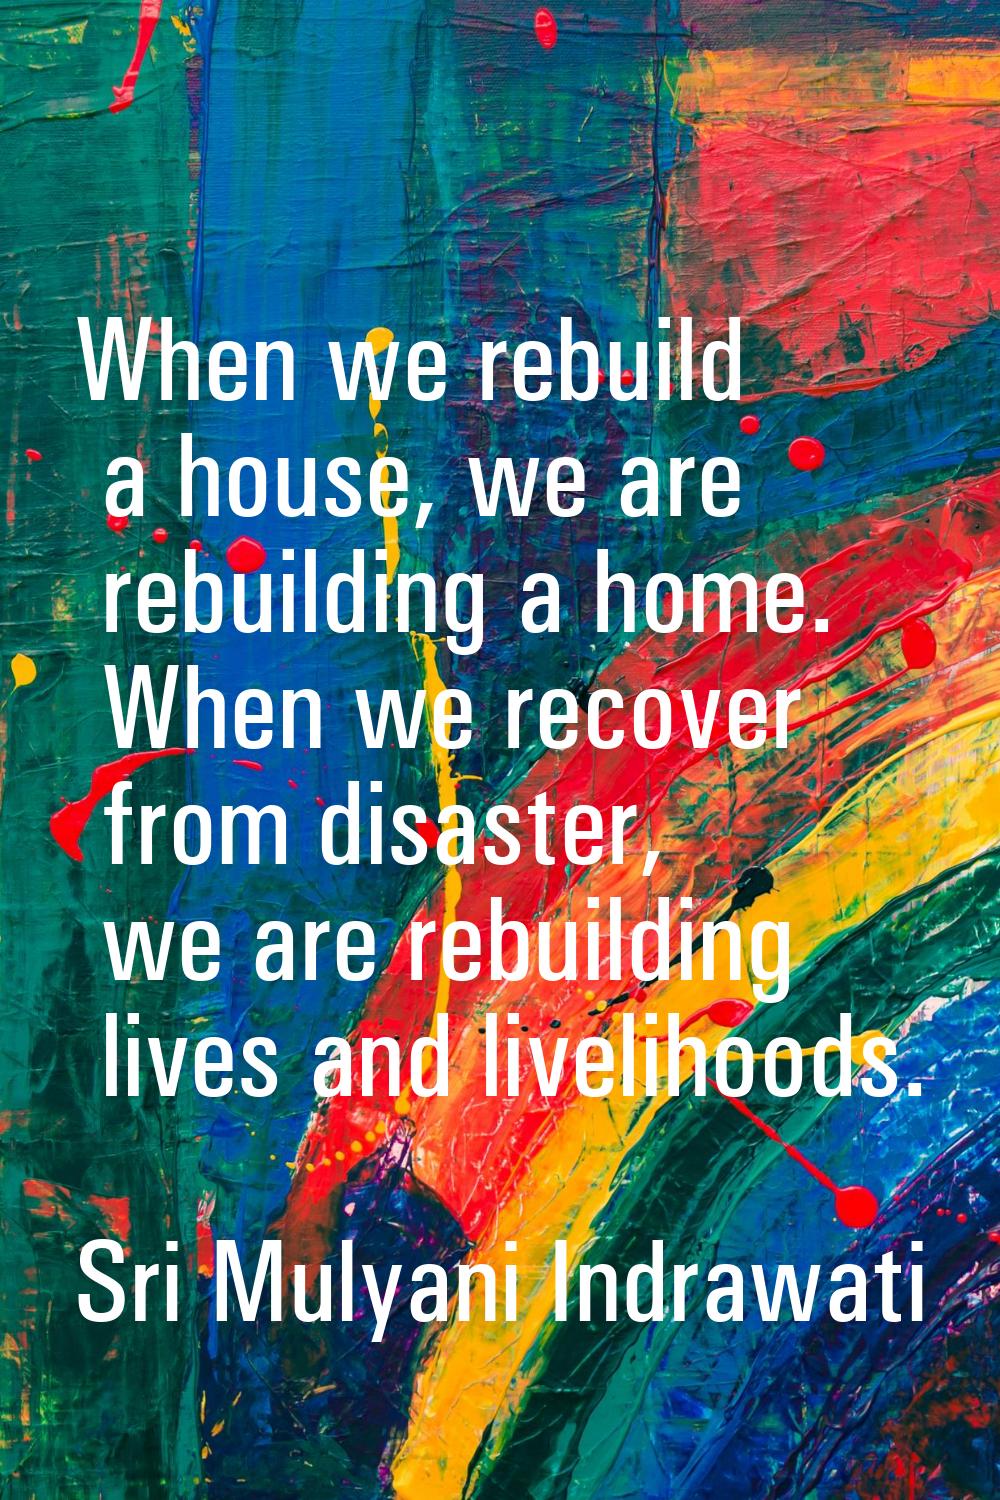 When we rebuild a house, we are rebuilding a home. When we recover from disaster, we are rebuilding